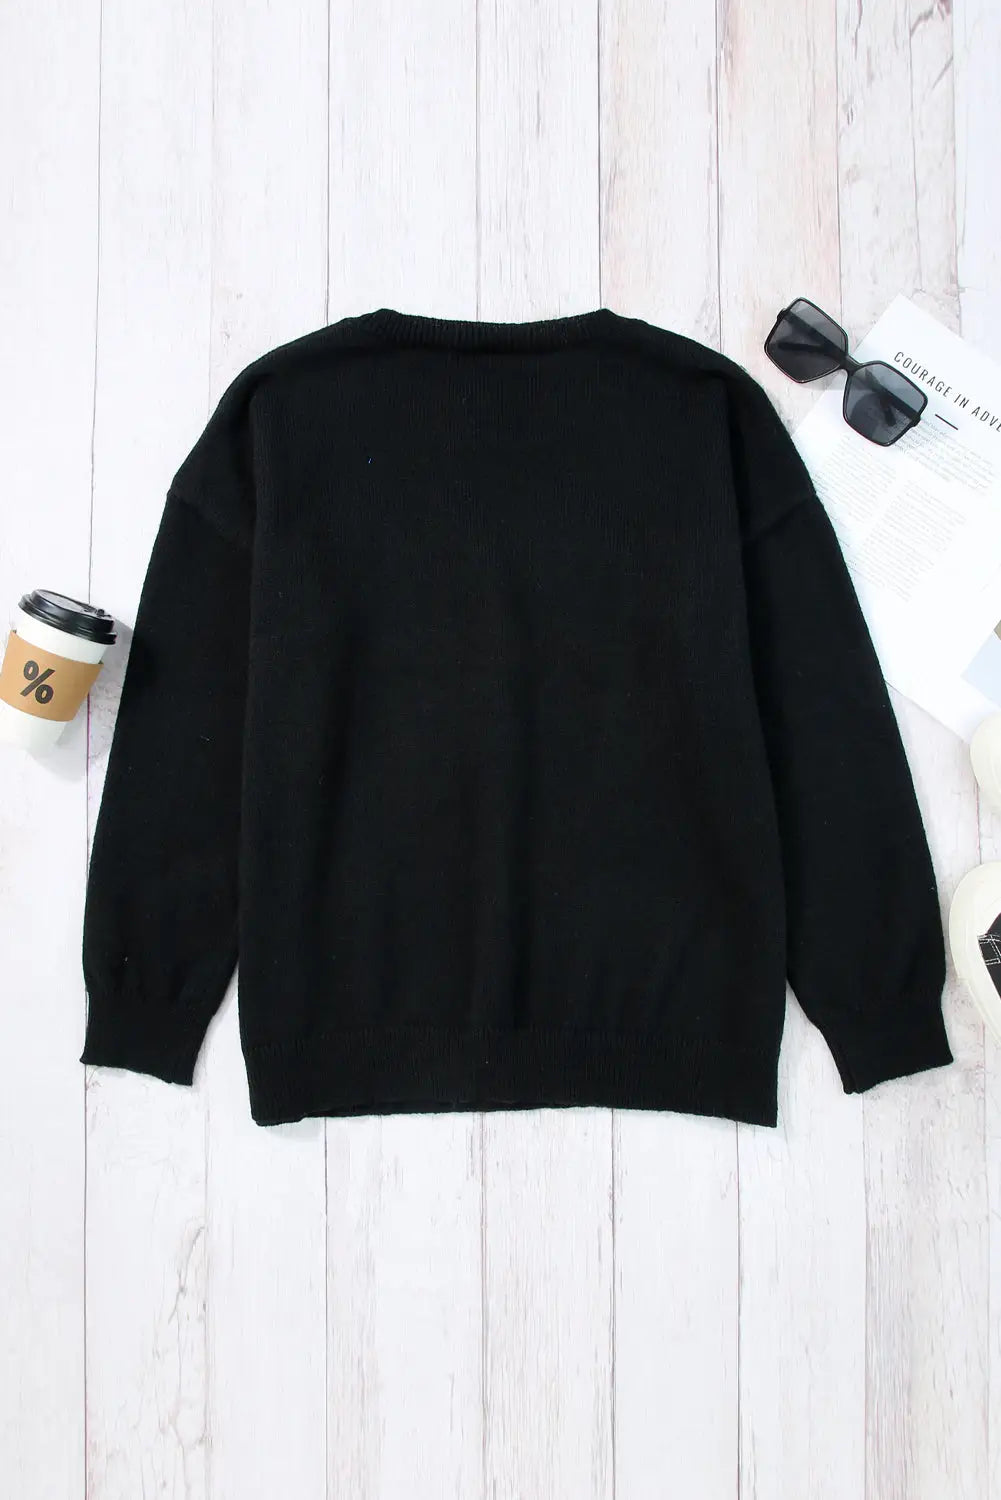 White merry & bright round neck casual sweater - sweaters cardigans